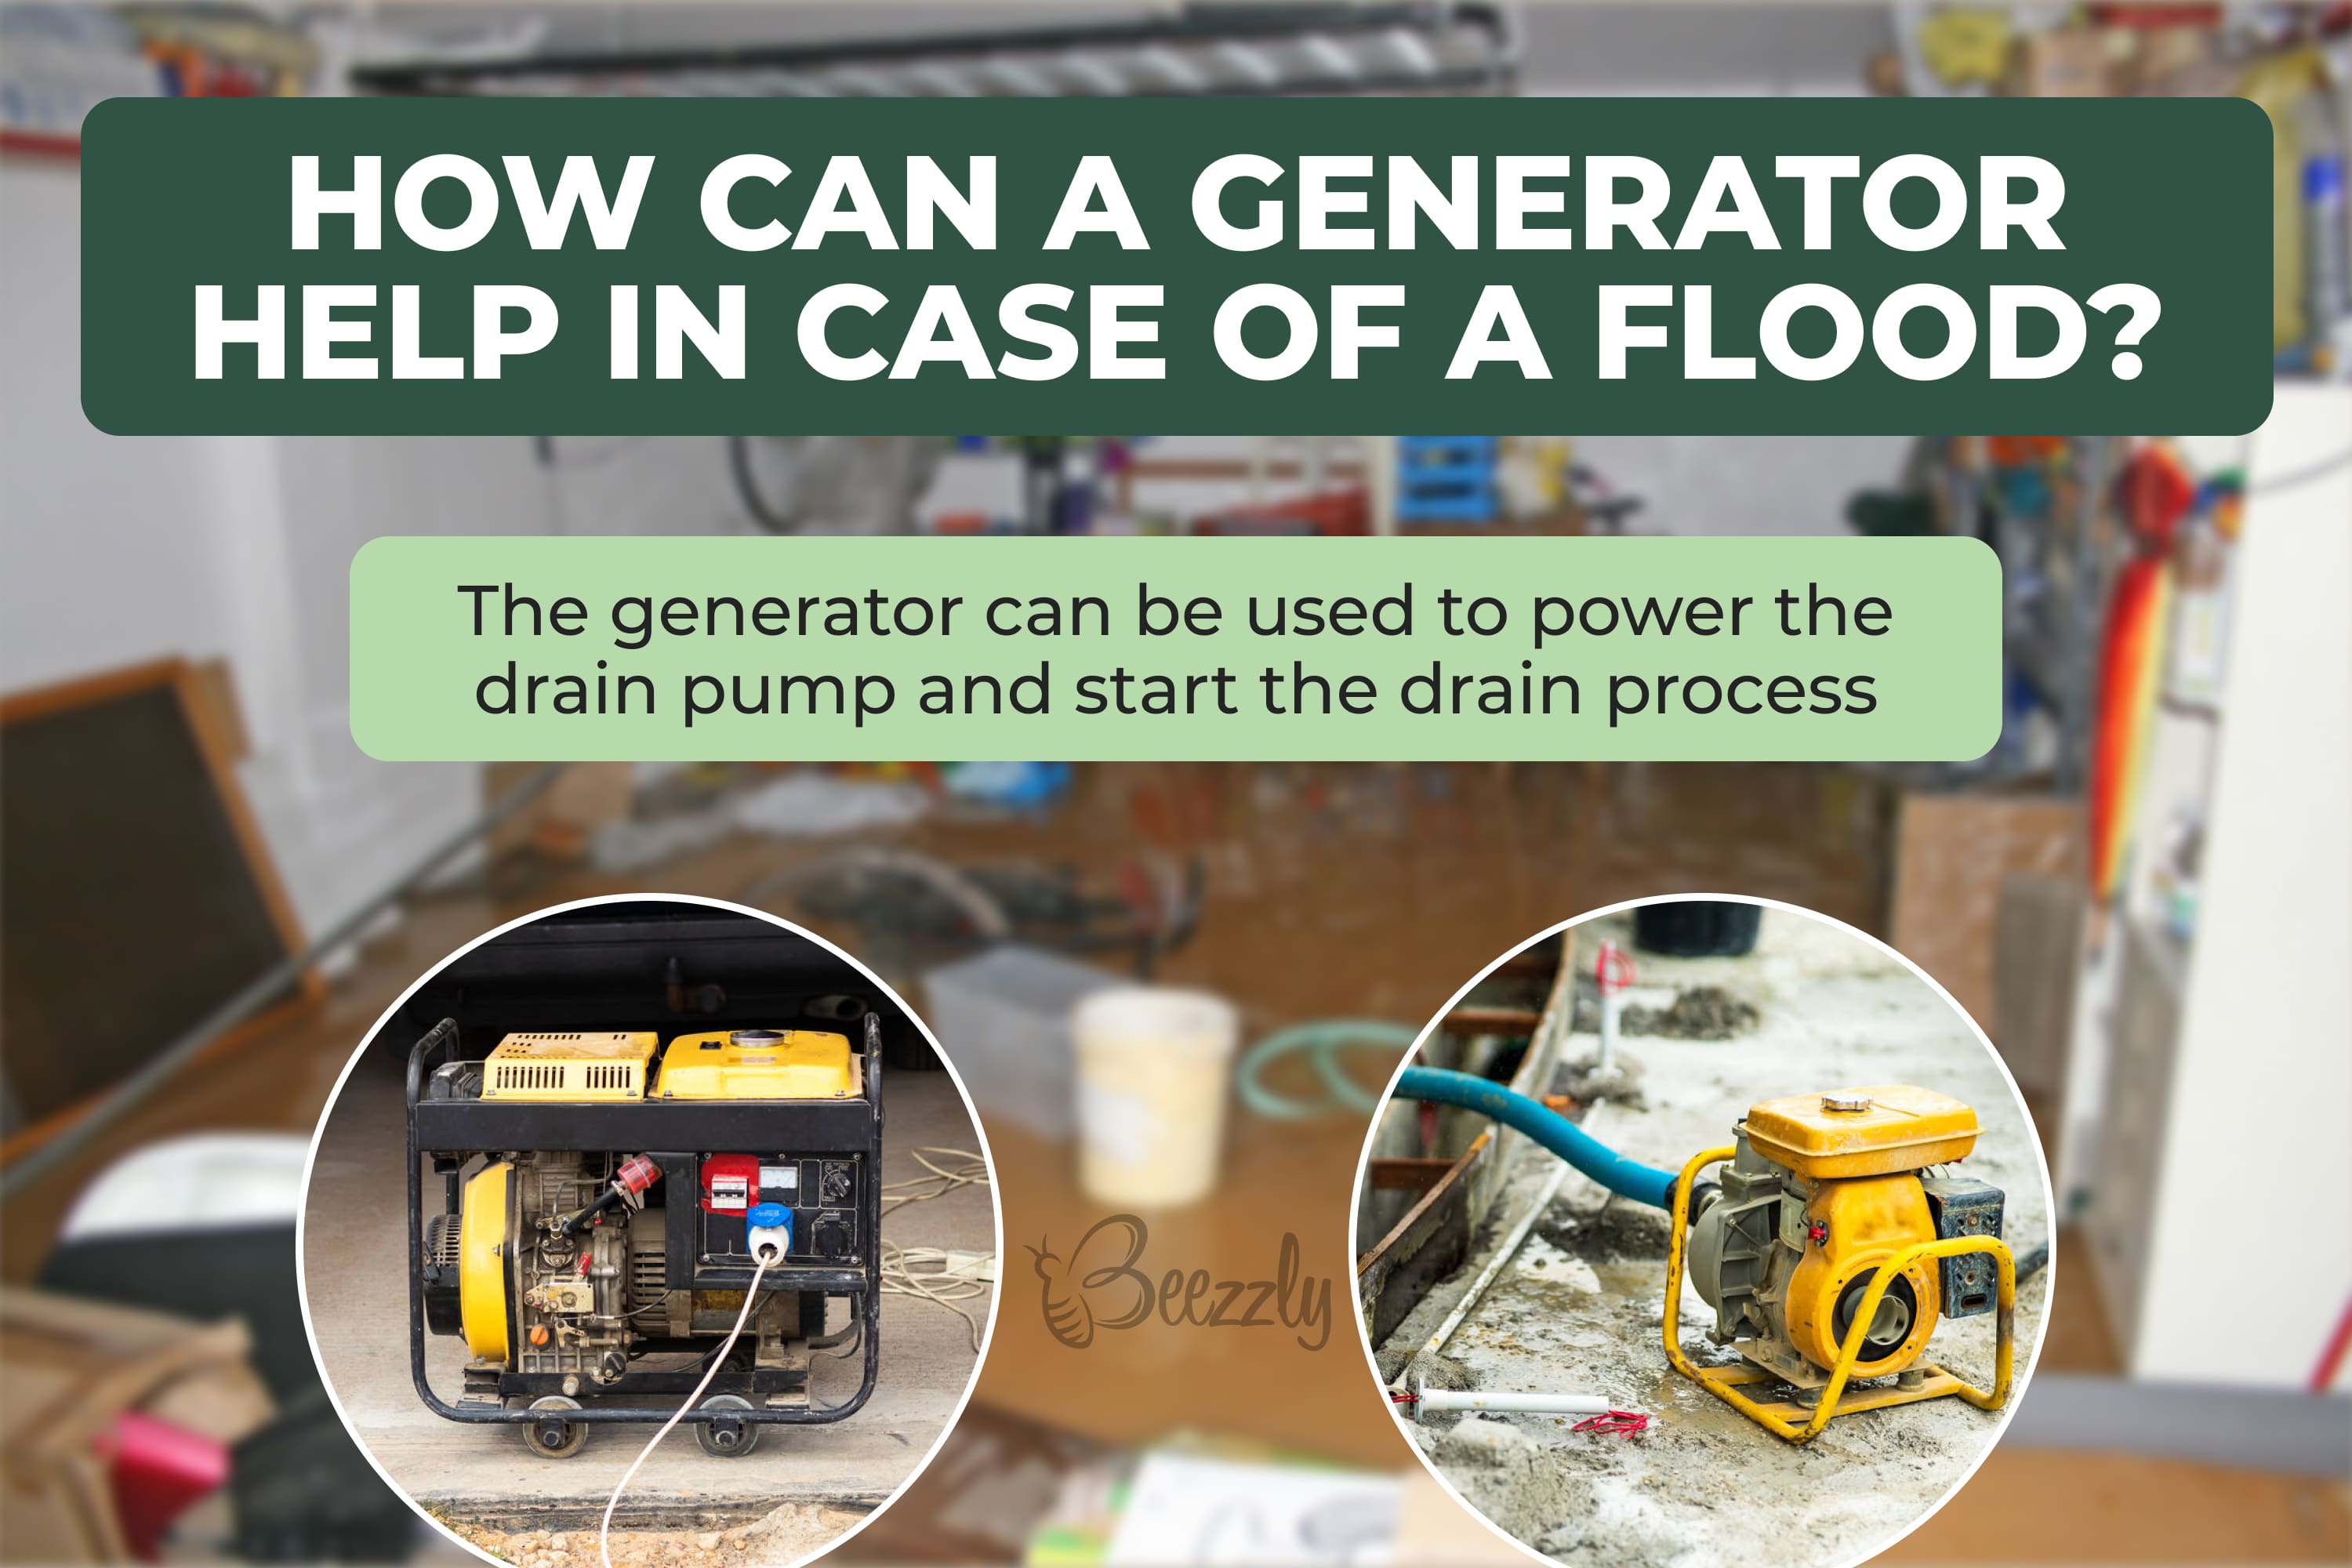 How can a generator help in case of a flood